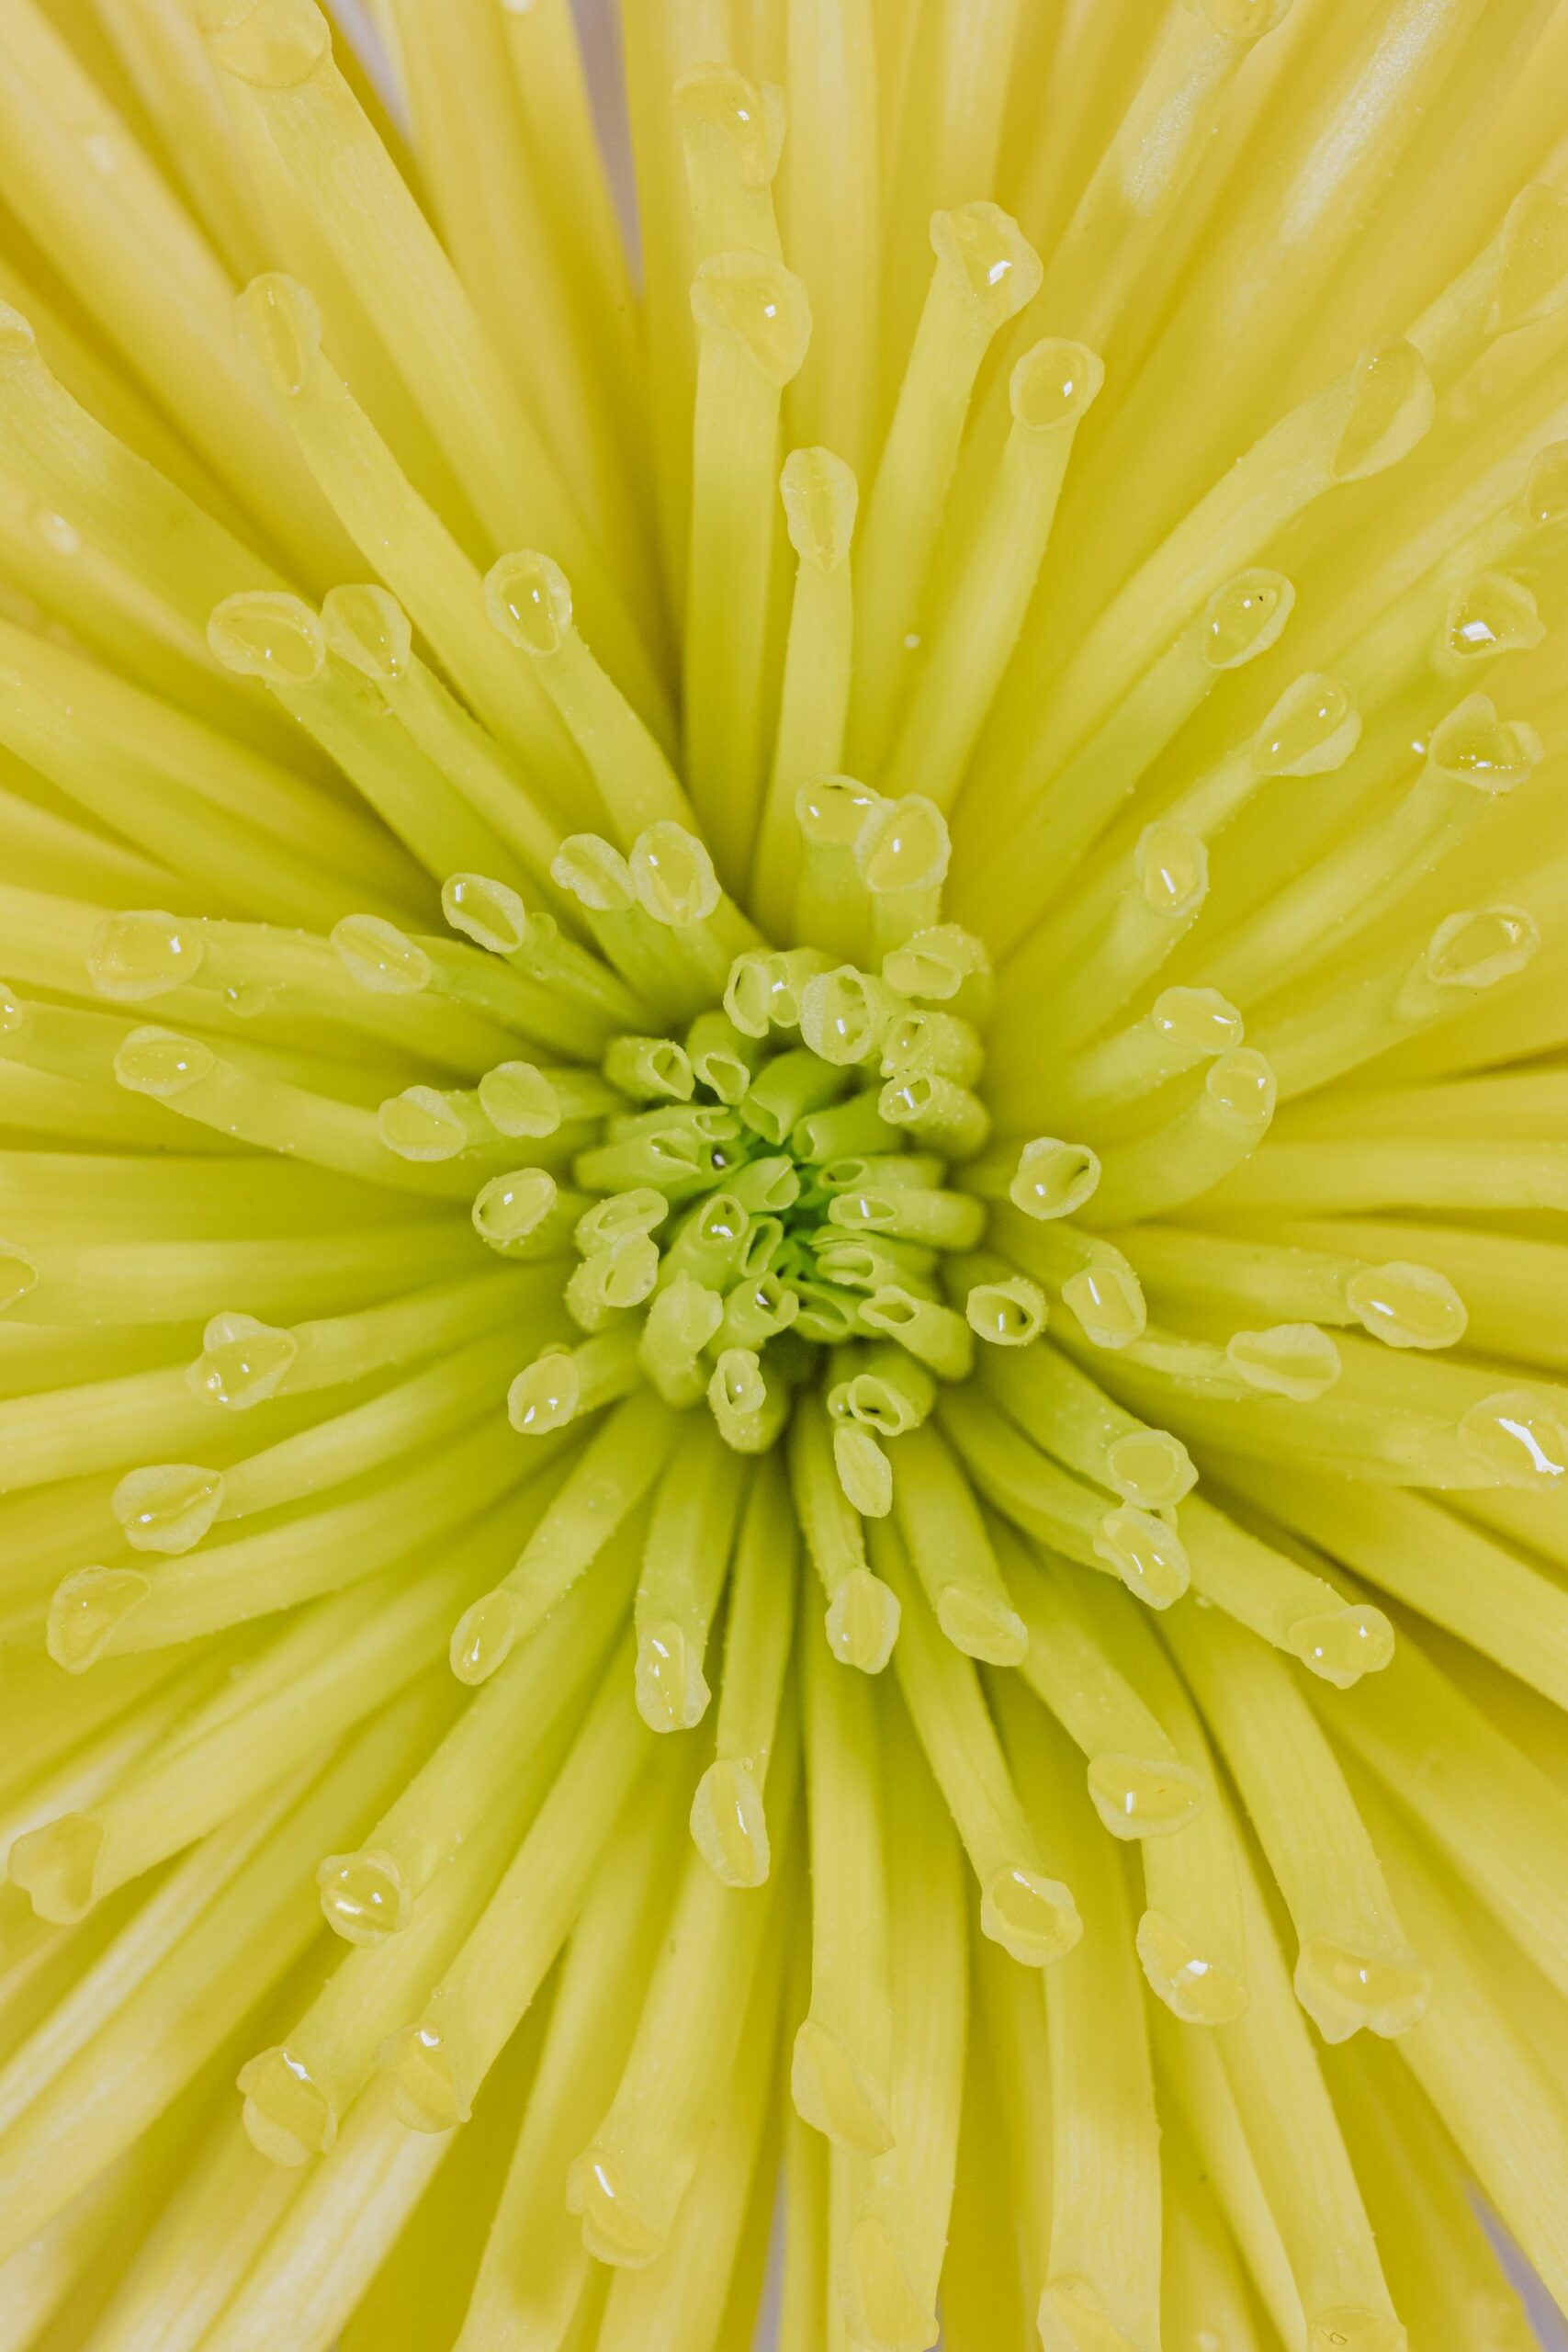 Image of a flower blooming